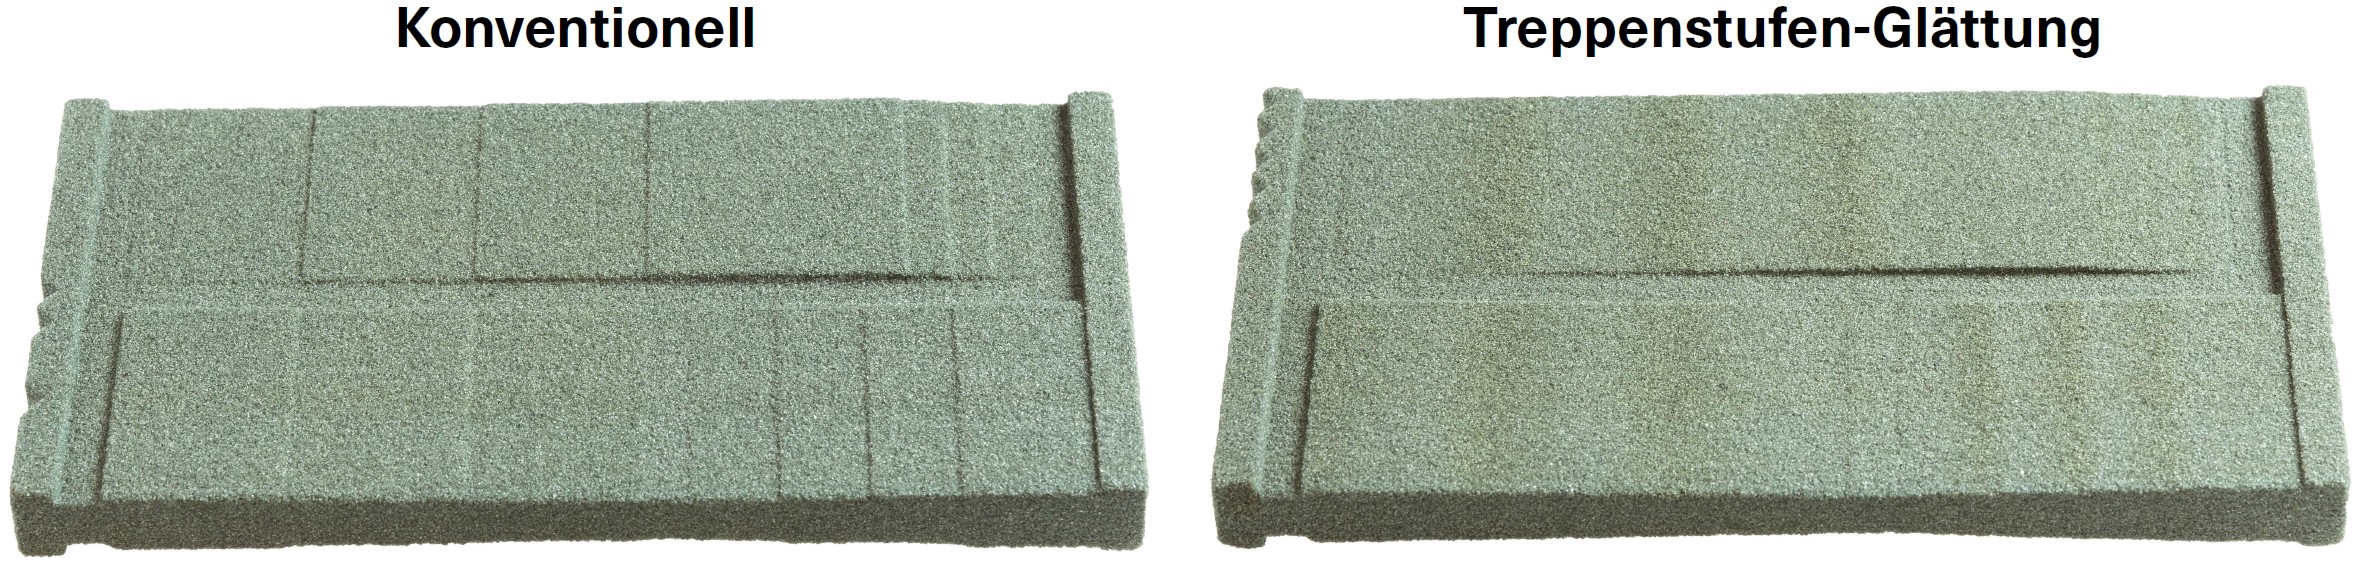 Figure 2: Comparison of conventionally manufactured test panels (left) with smoothed test panels (right)